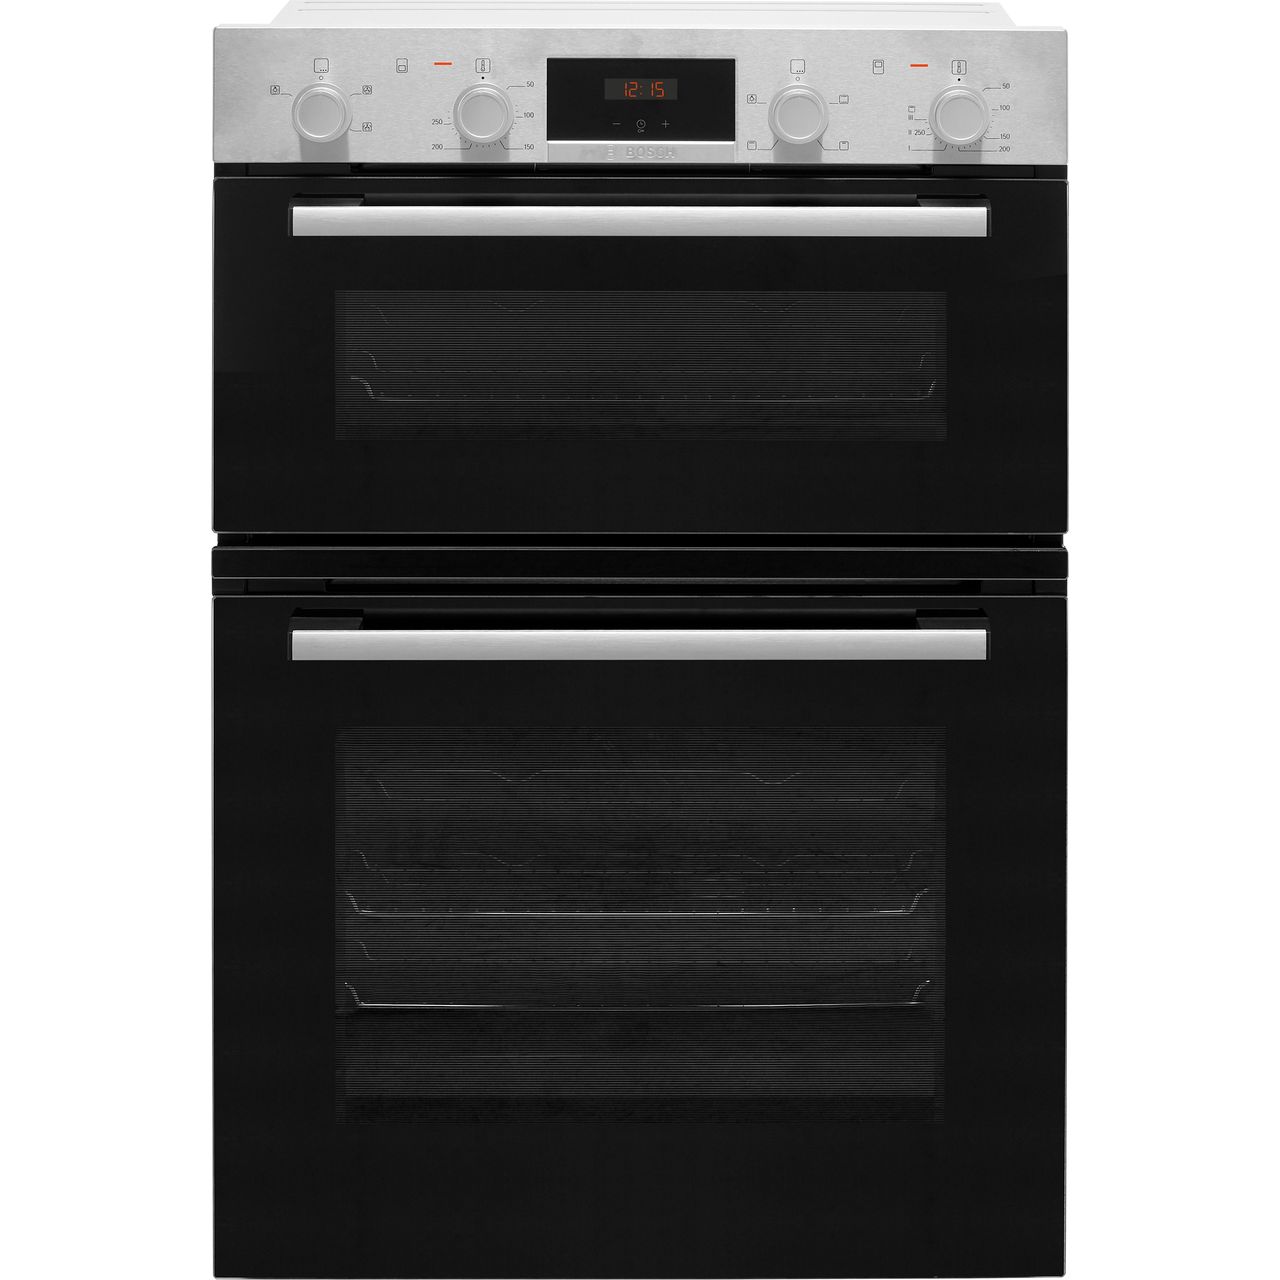 Bosch Series 2 MHA133BR0B Built In Electric Double Oven - Stainless Steel - A/B Rated, Stainless Steel